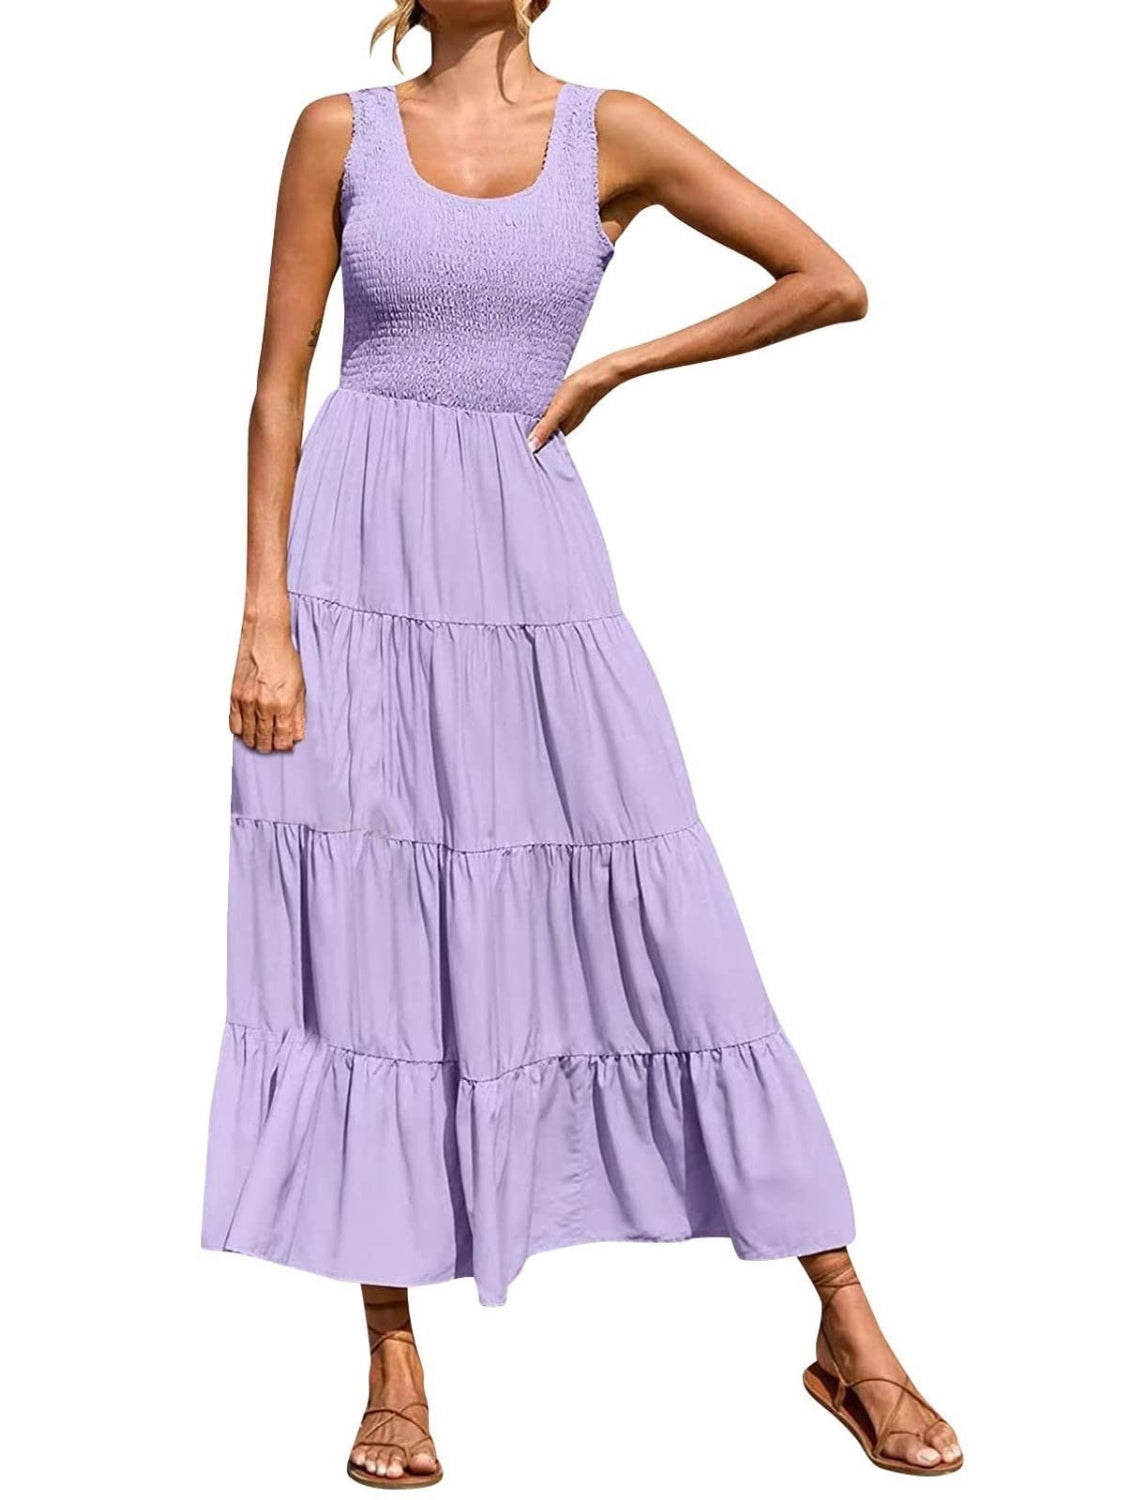 Smocked Tiered Midi Dress with Wide Straps